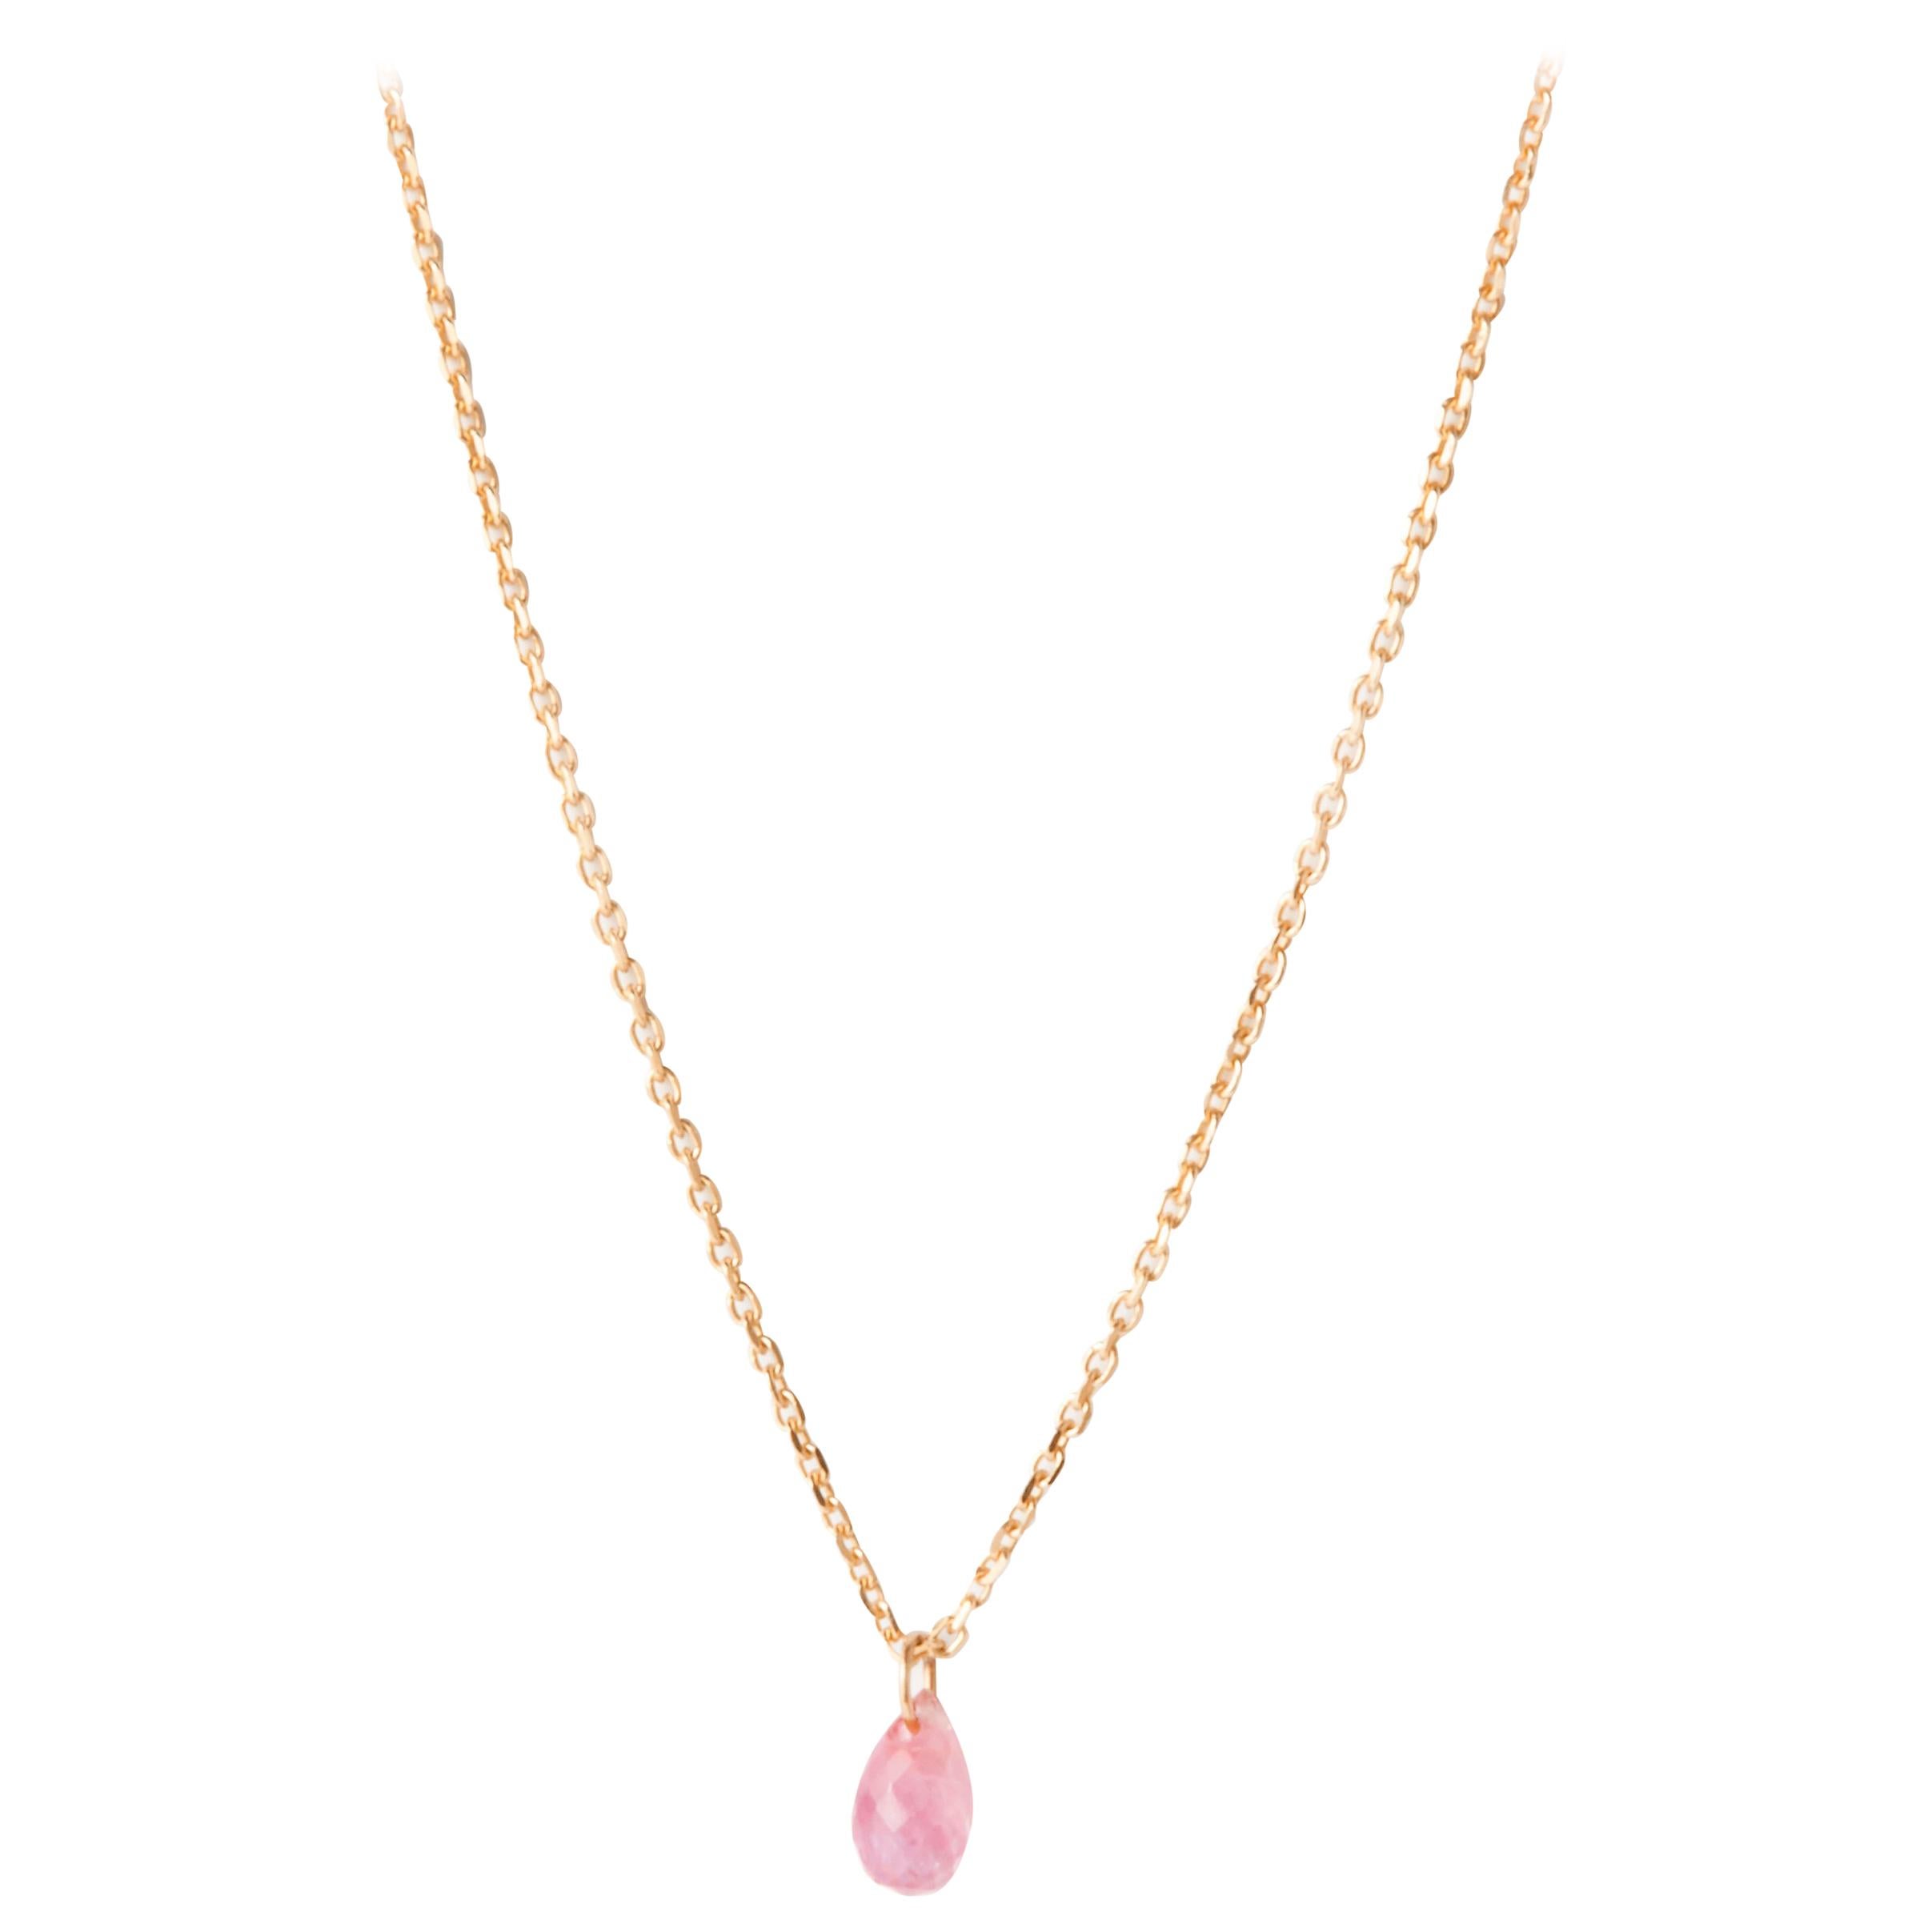 Pink Sapphire Drop Necklace in Solid Yellow Gold by Allison Bryan